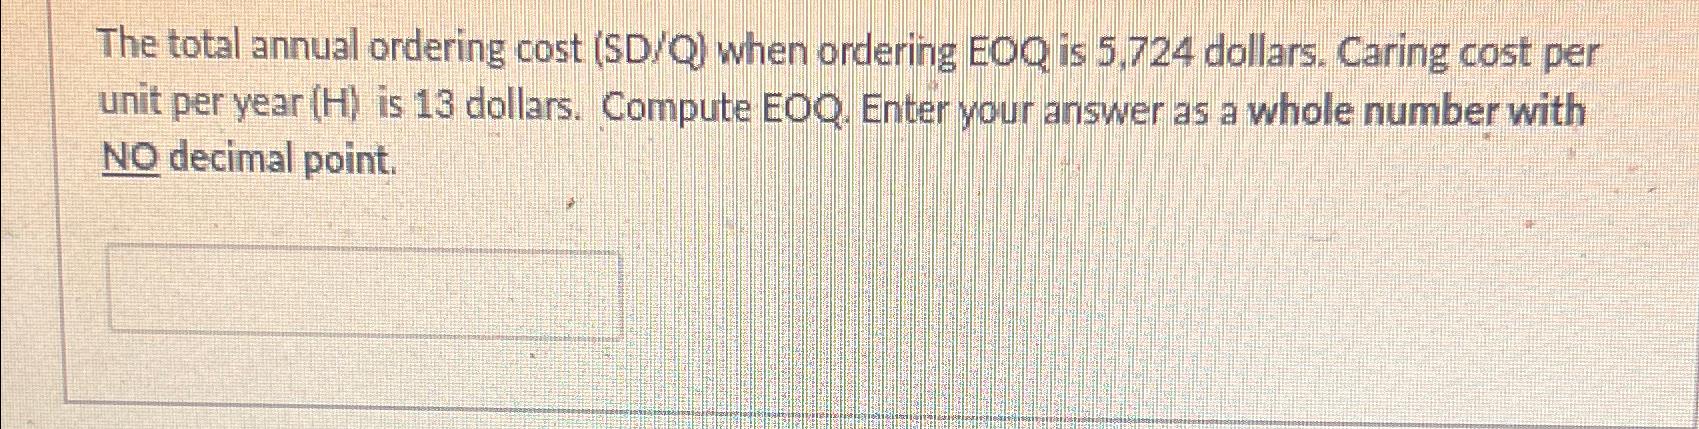 The total annual ordering cost (SD/Q) when ordering EOQ is 5,724 dollars. Caring cost per unit per year (H)